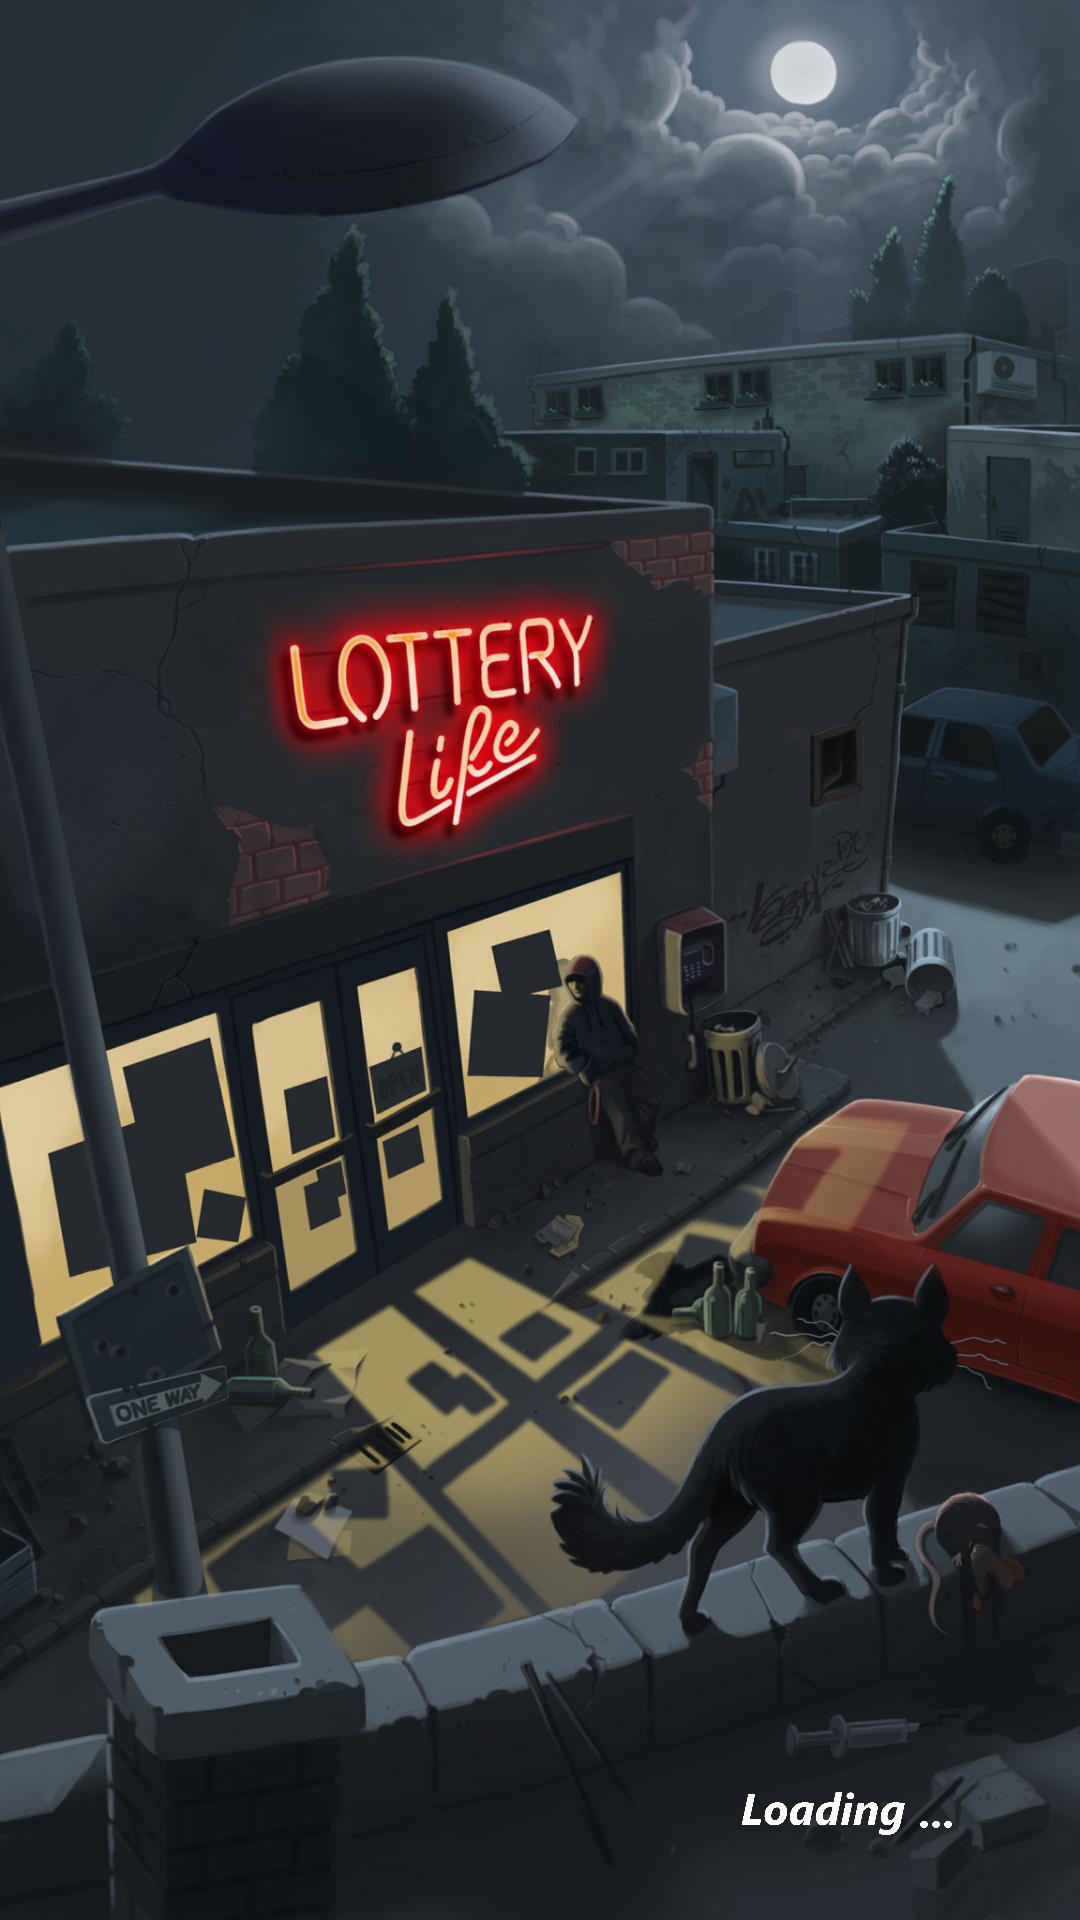 Lots игра. Bad game. APK. Life Lottery Scrapped.